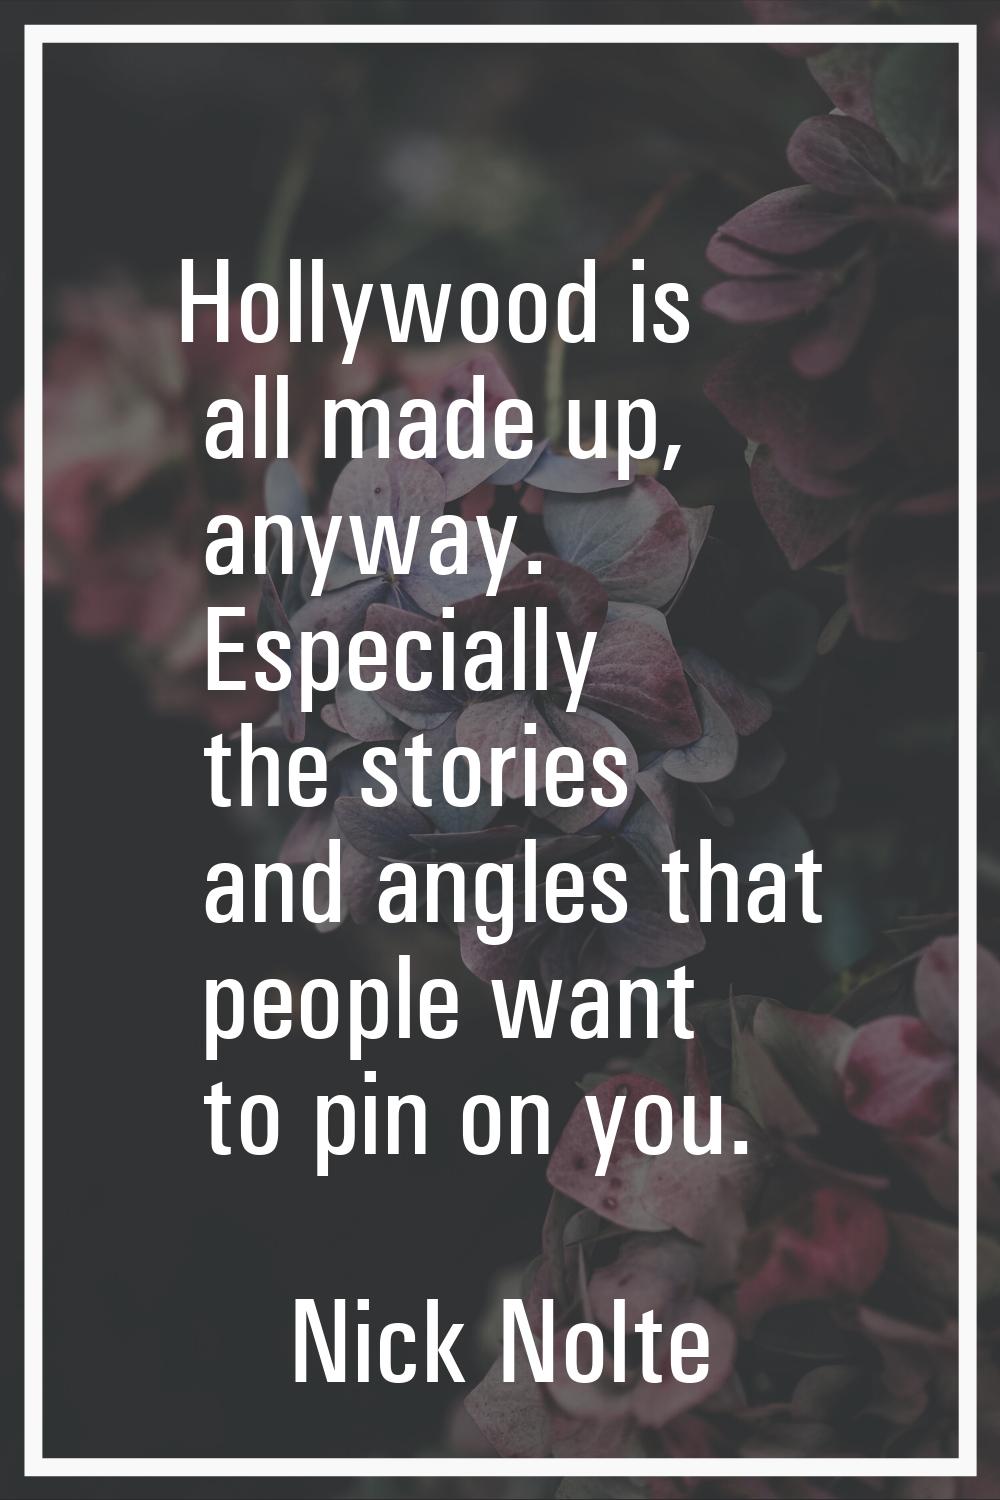 Hollywood is all made up, anyway. Especially the stories and angles that people want to pin on you.